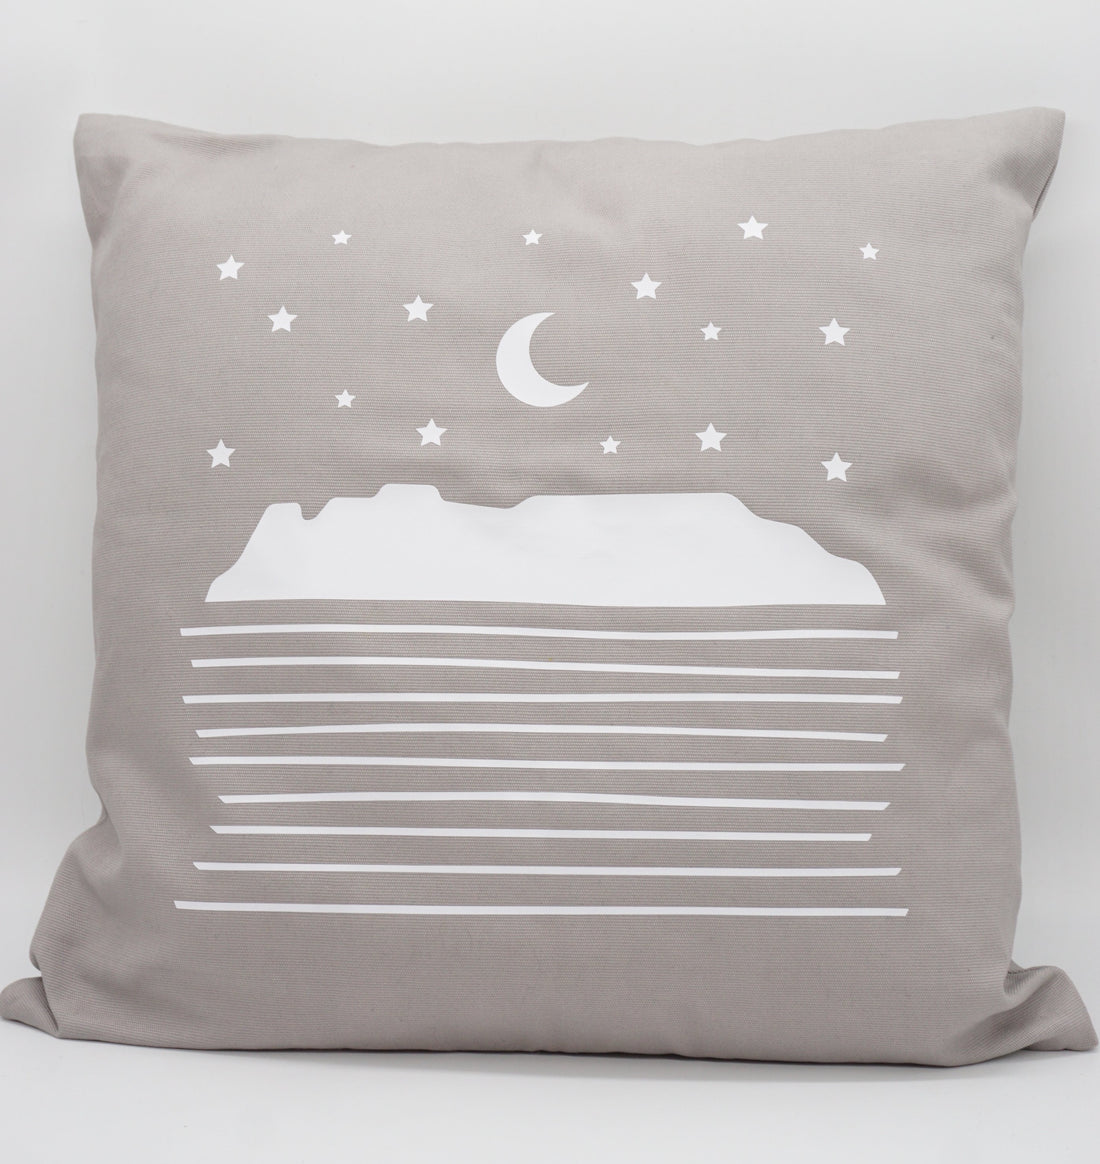 Square pillow cover with sleeping giant design in grey or black